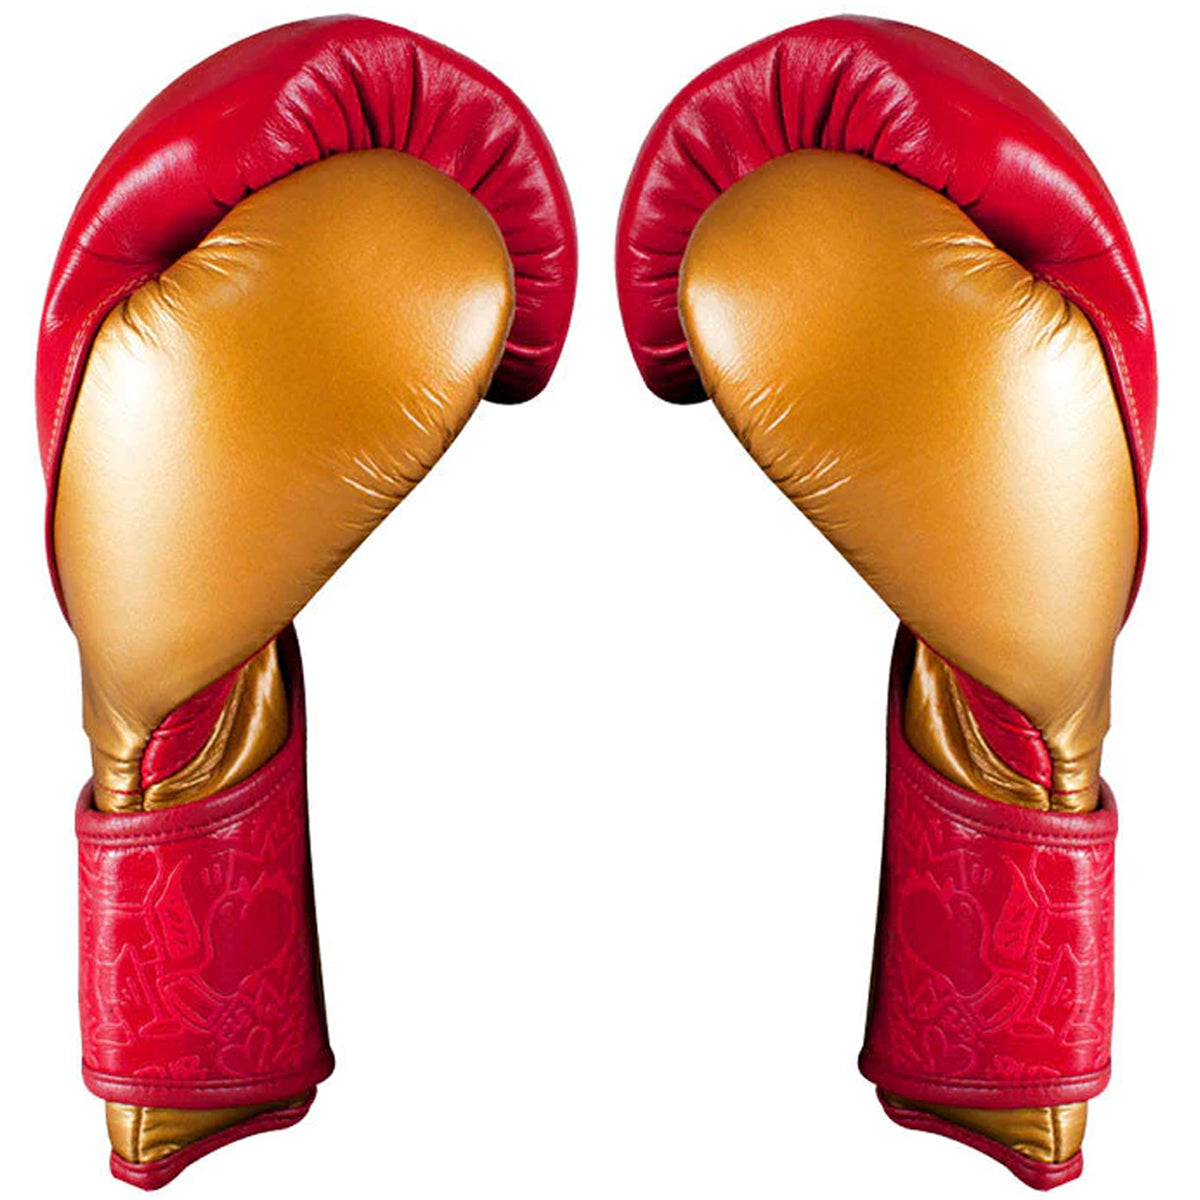 Cleto Reyes High Precision Hook and Loop Training Boxing Gloves - Red/Solid Gold Cleto Reyes